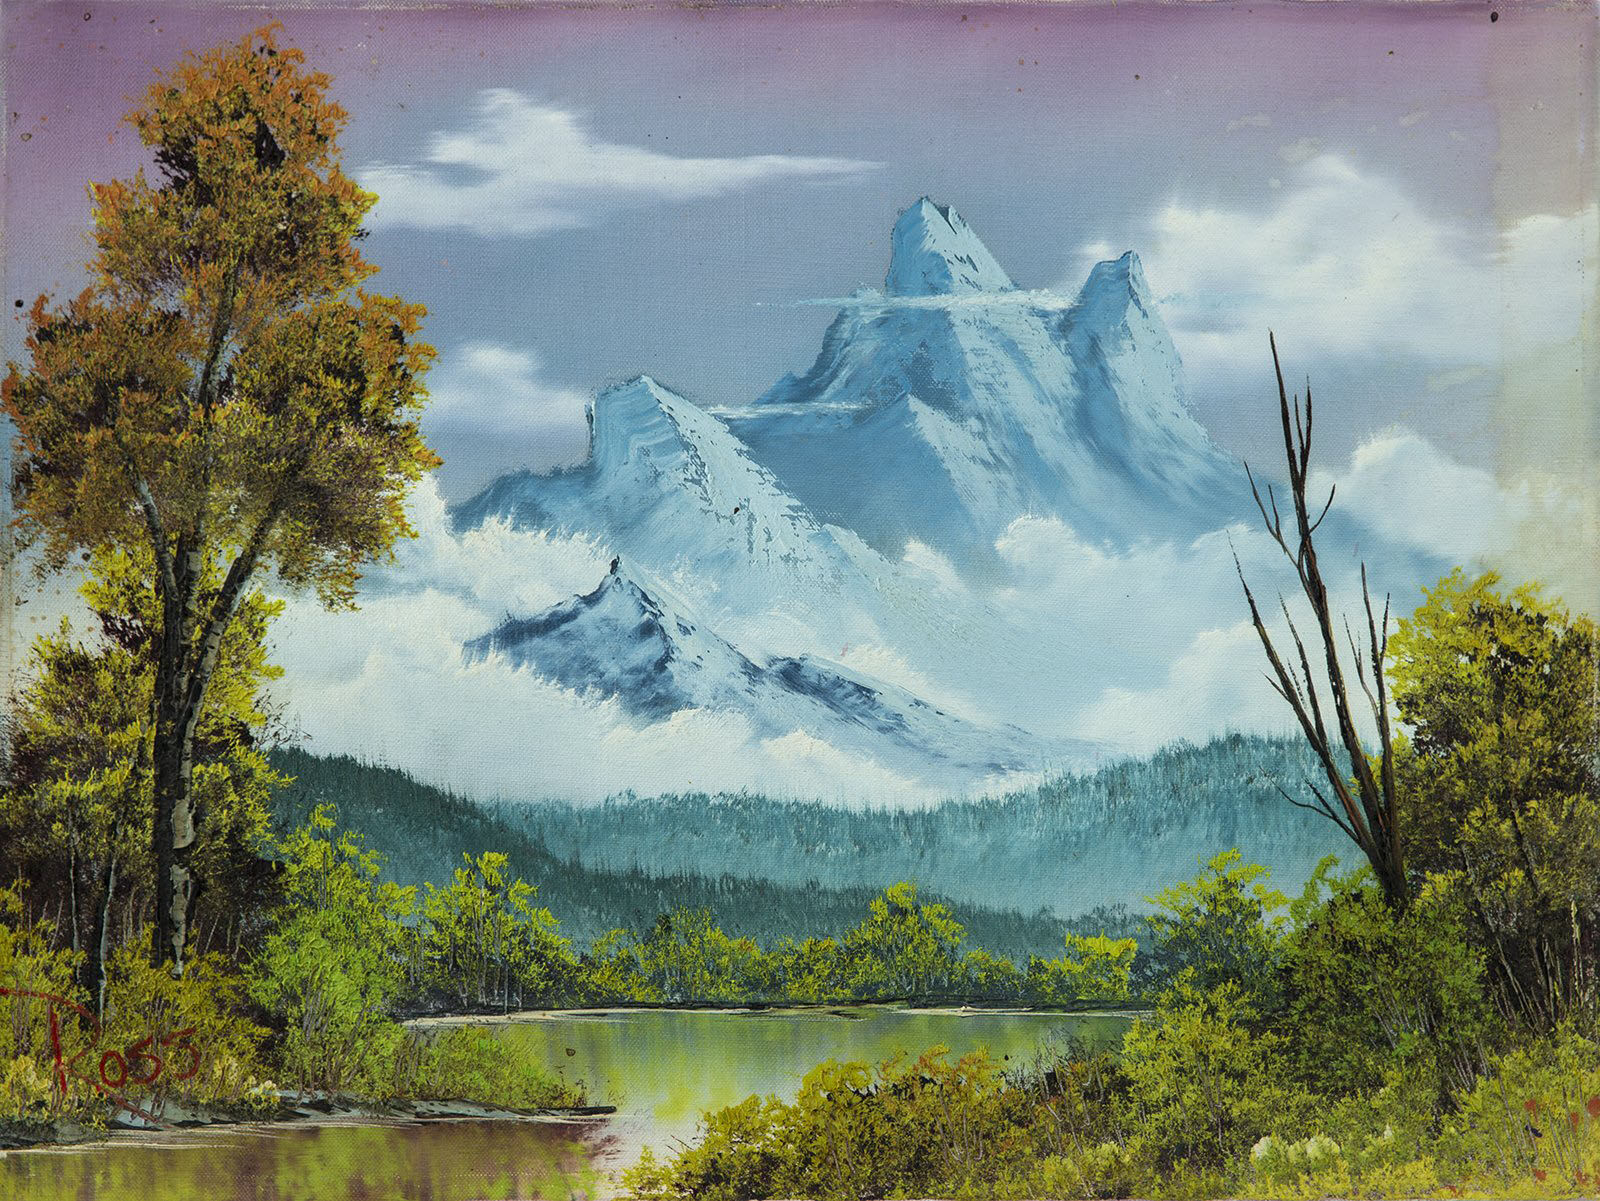 Bob Ross, Towering Peaks, Original Oil Painting, 1980. Image Used with Permission © Mode